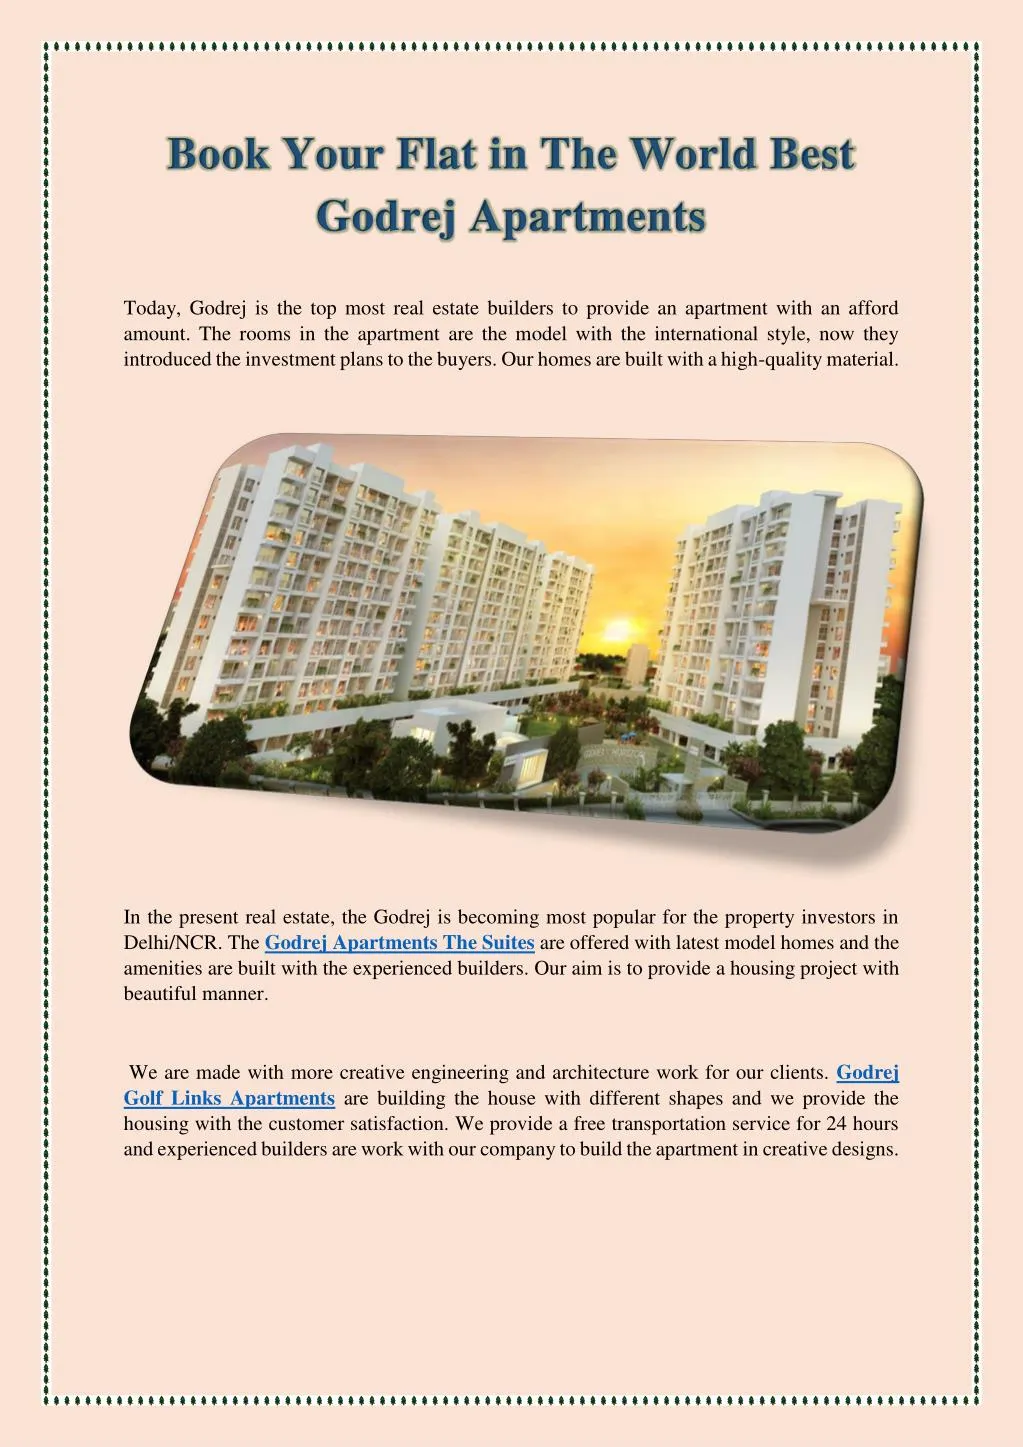 book your flat in the world best godrej apartments